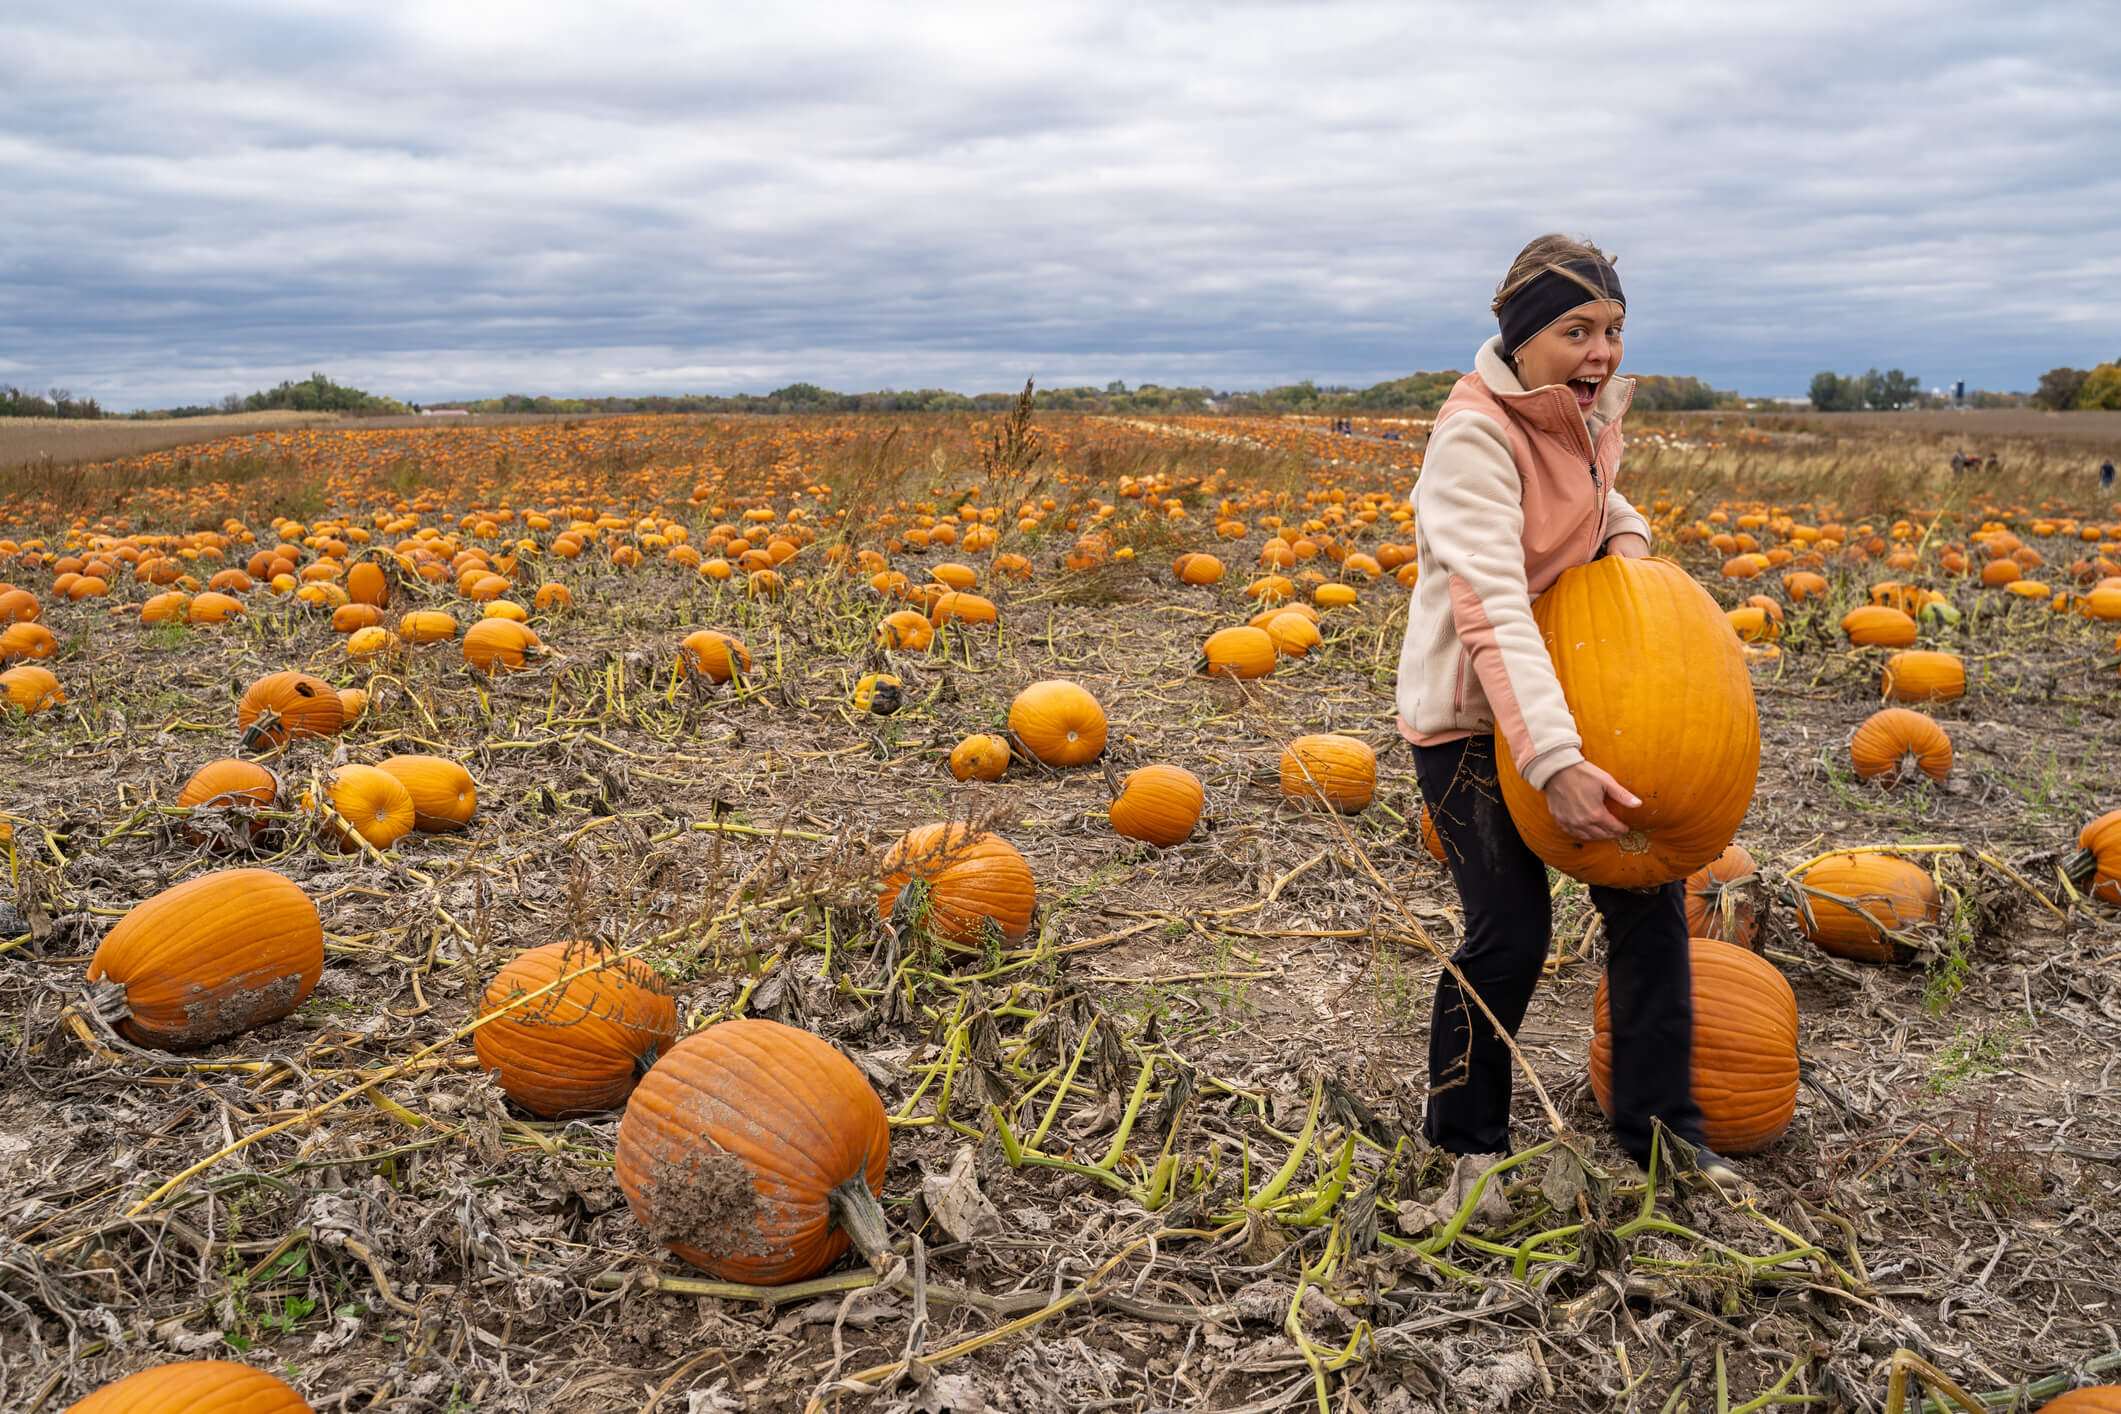 Adult woman (30s) attempts and struggles to lift and to pick up a giant pumpkin from a pumpkin patch. Smiling and laughing and having fun